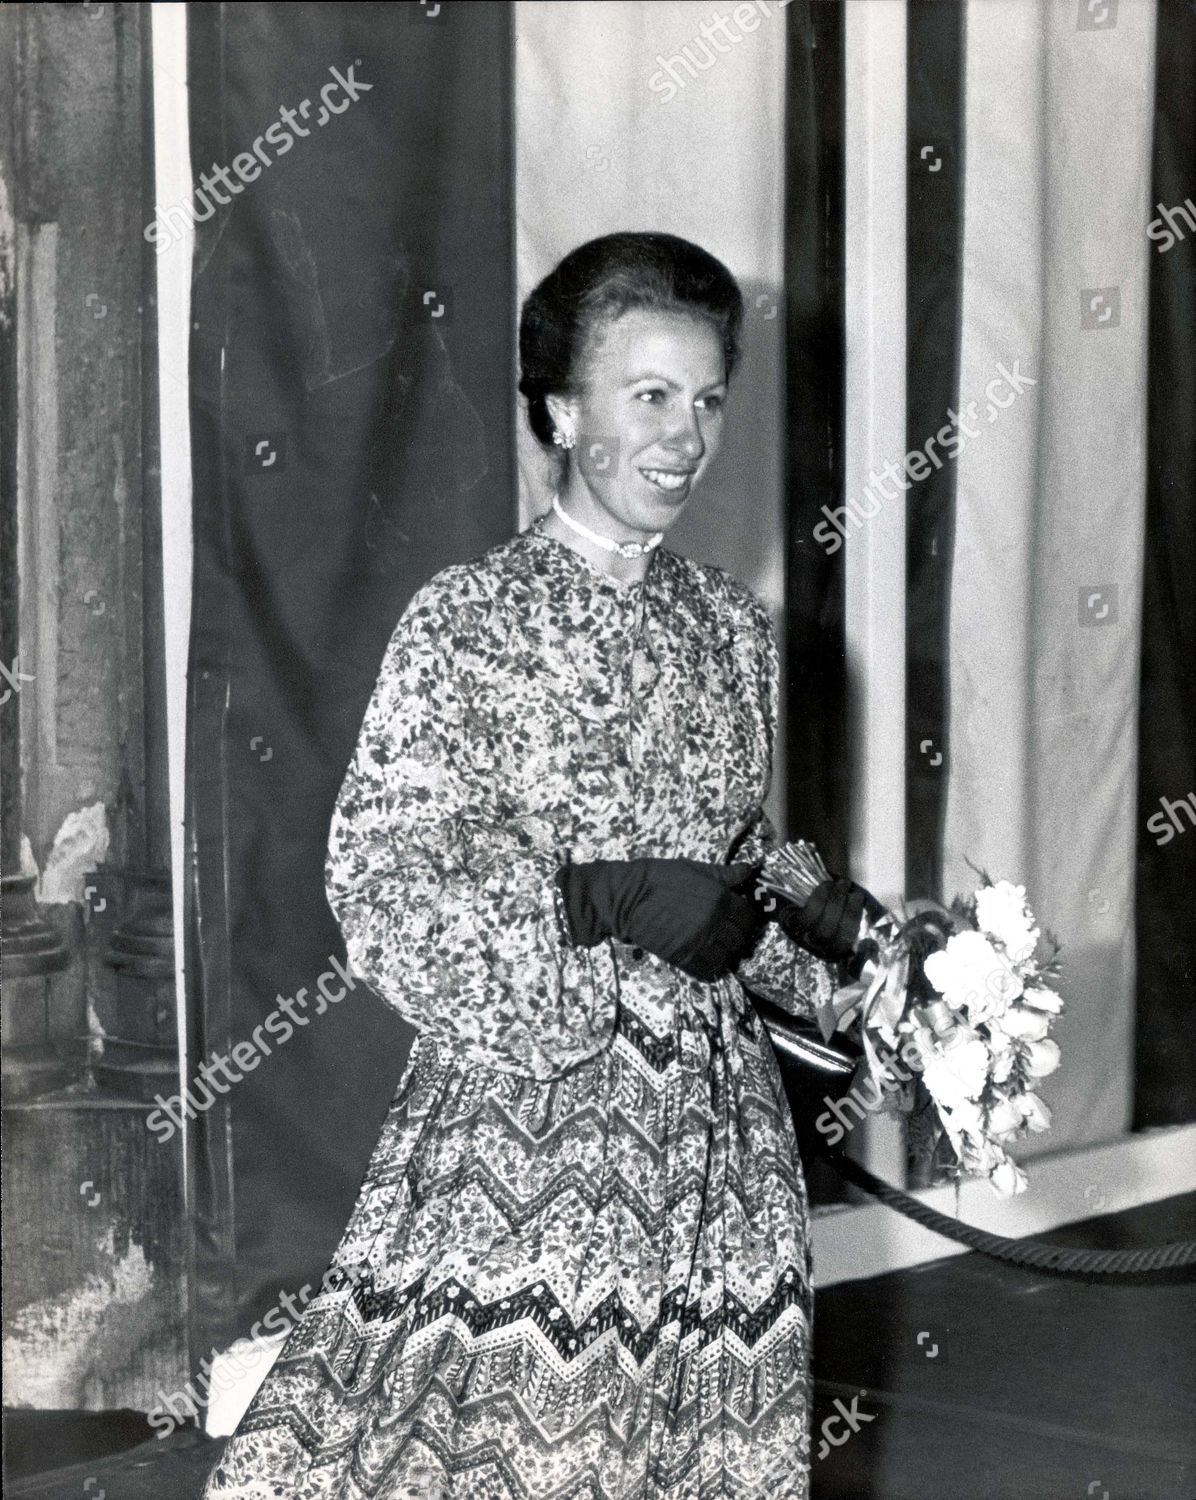 princess-anne-the-princess-royal-at-the-guildhall-london-to-attend-clothing-ceremony-of-the-carmens-company-of-which-she-will-become-an-honorary-liveryman-5th-october-1982-princess-anne-leaving-the-guidehall-today-shutterstock-editorial-1030433a.jpg